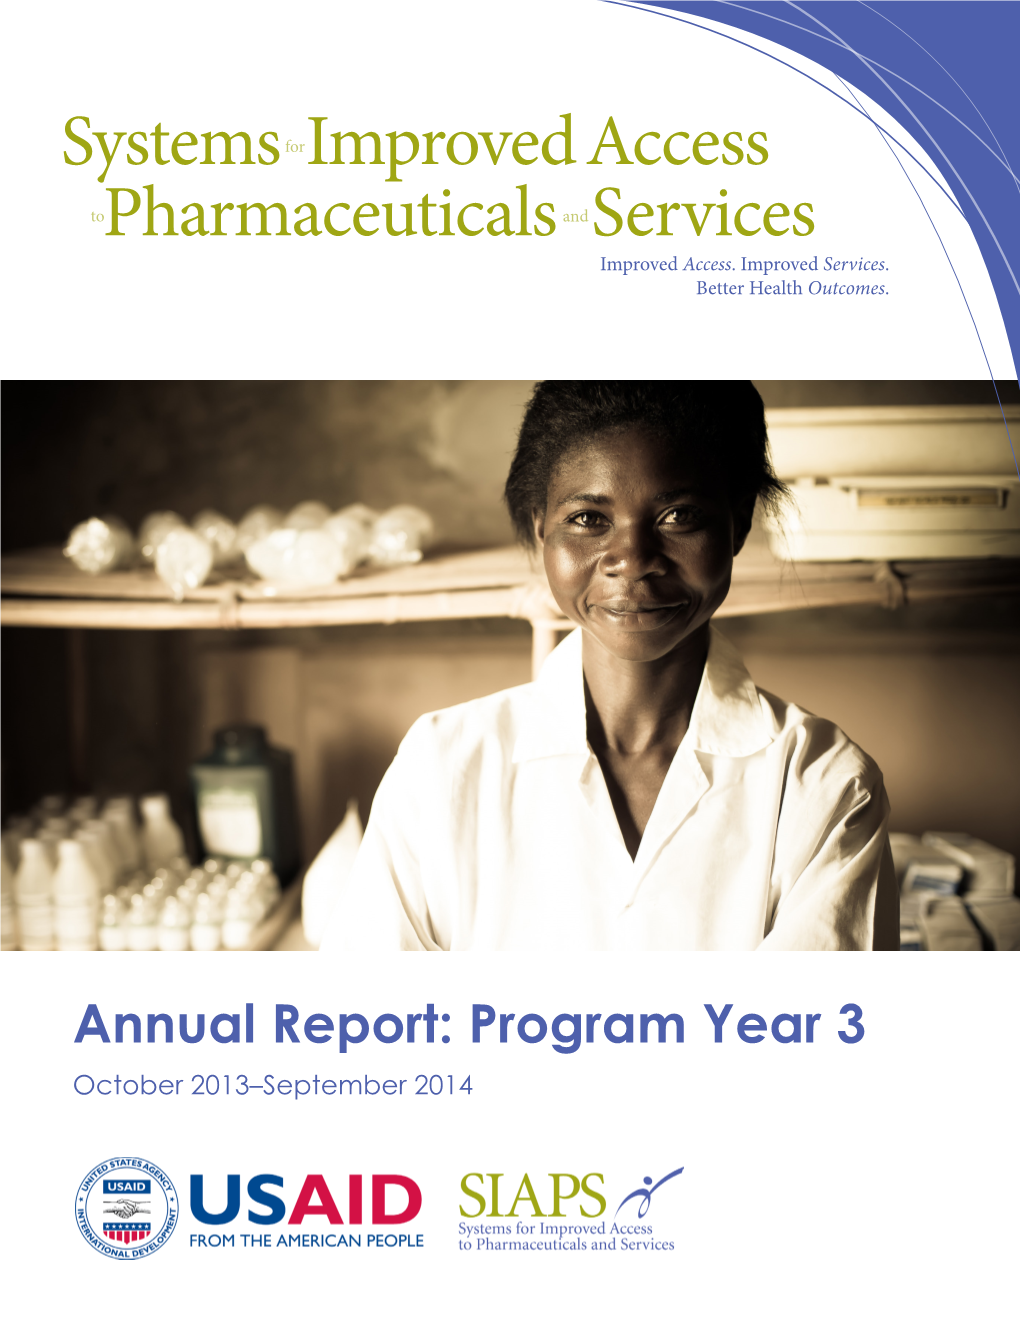 Improved Systems Access Pharmaceuticals Andservices